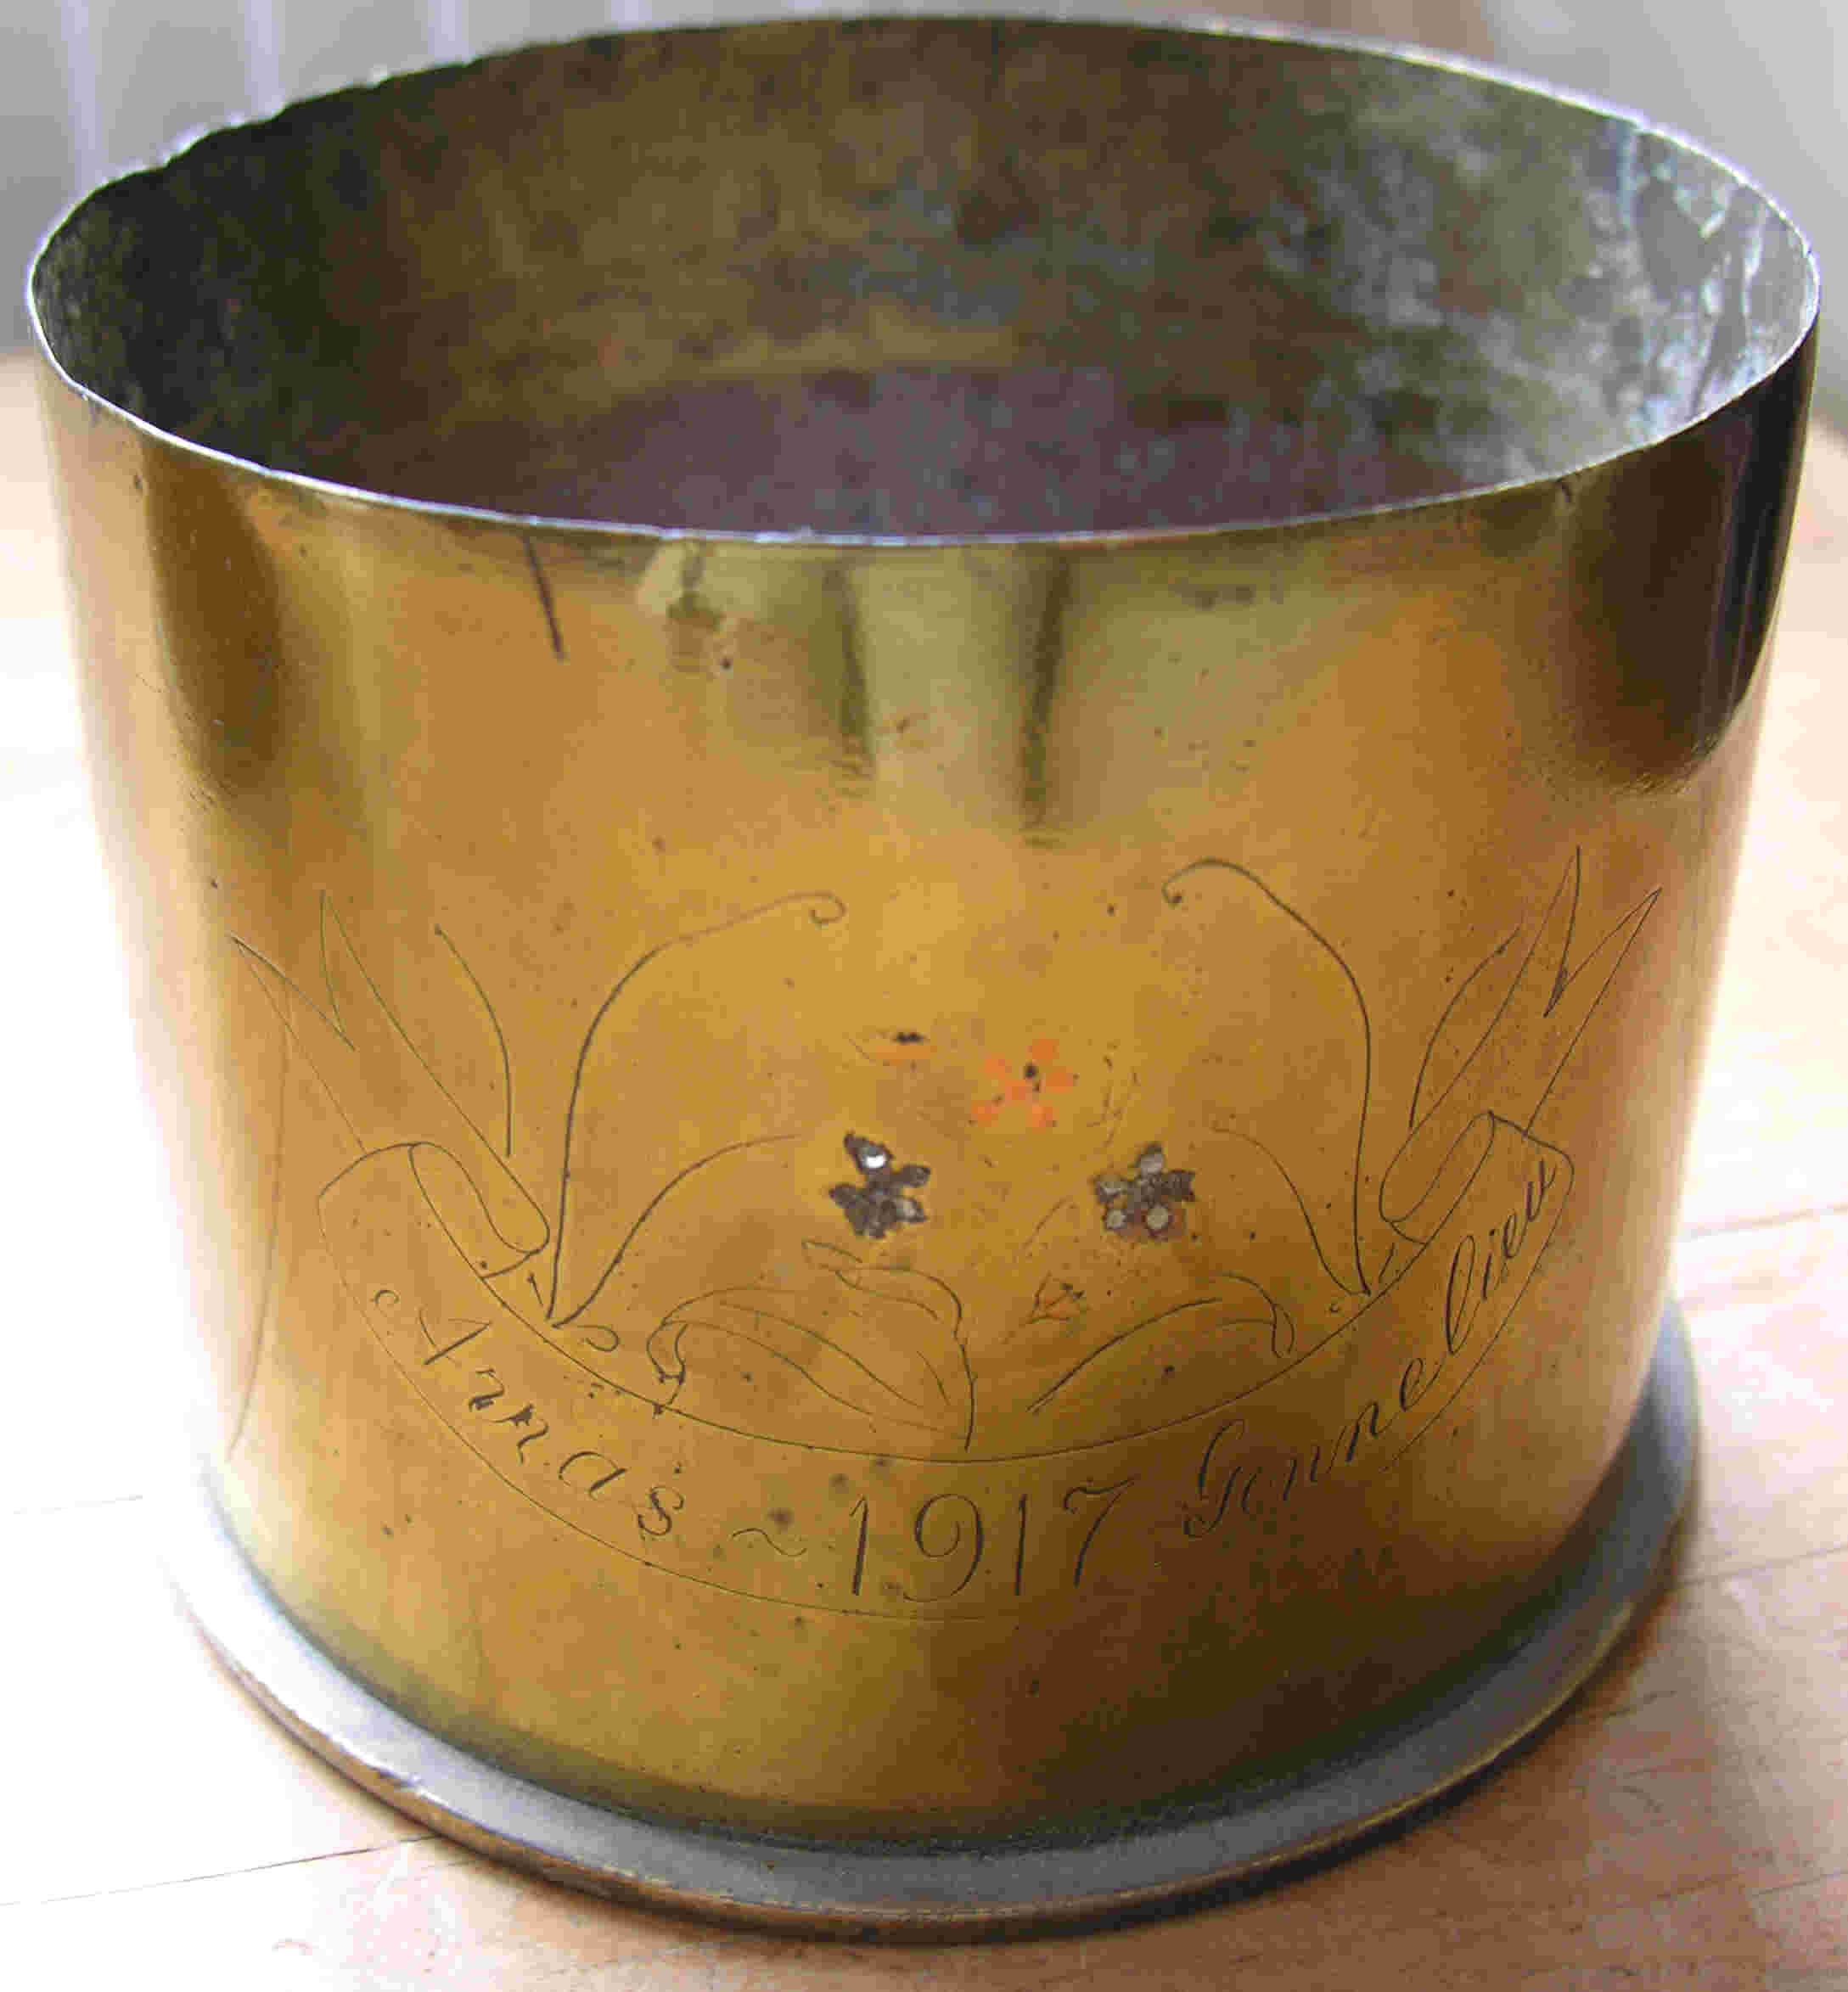 Decorated mortar shell case from the front during WW1 by Ronald George Woodland